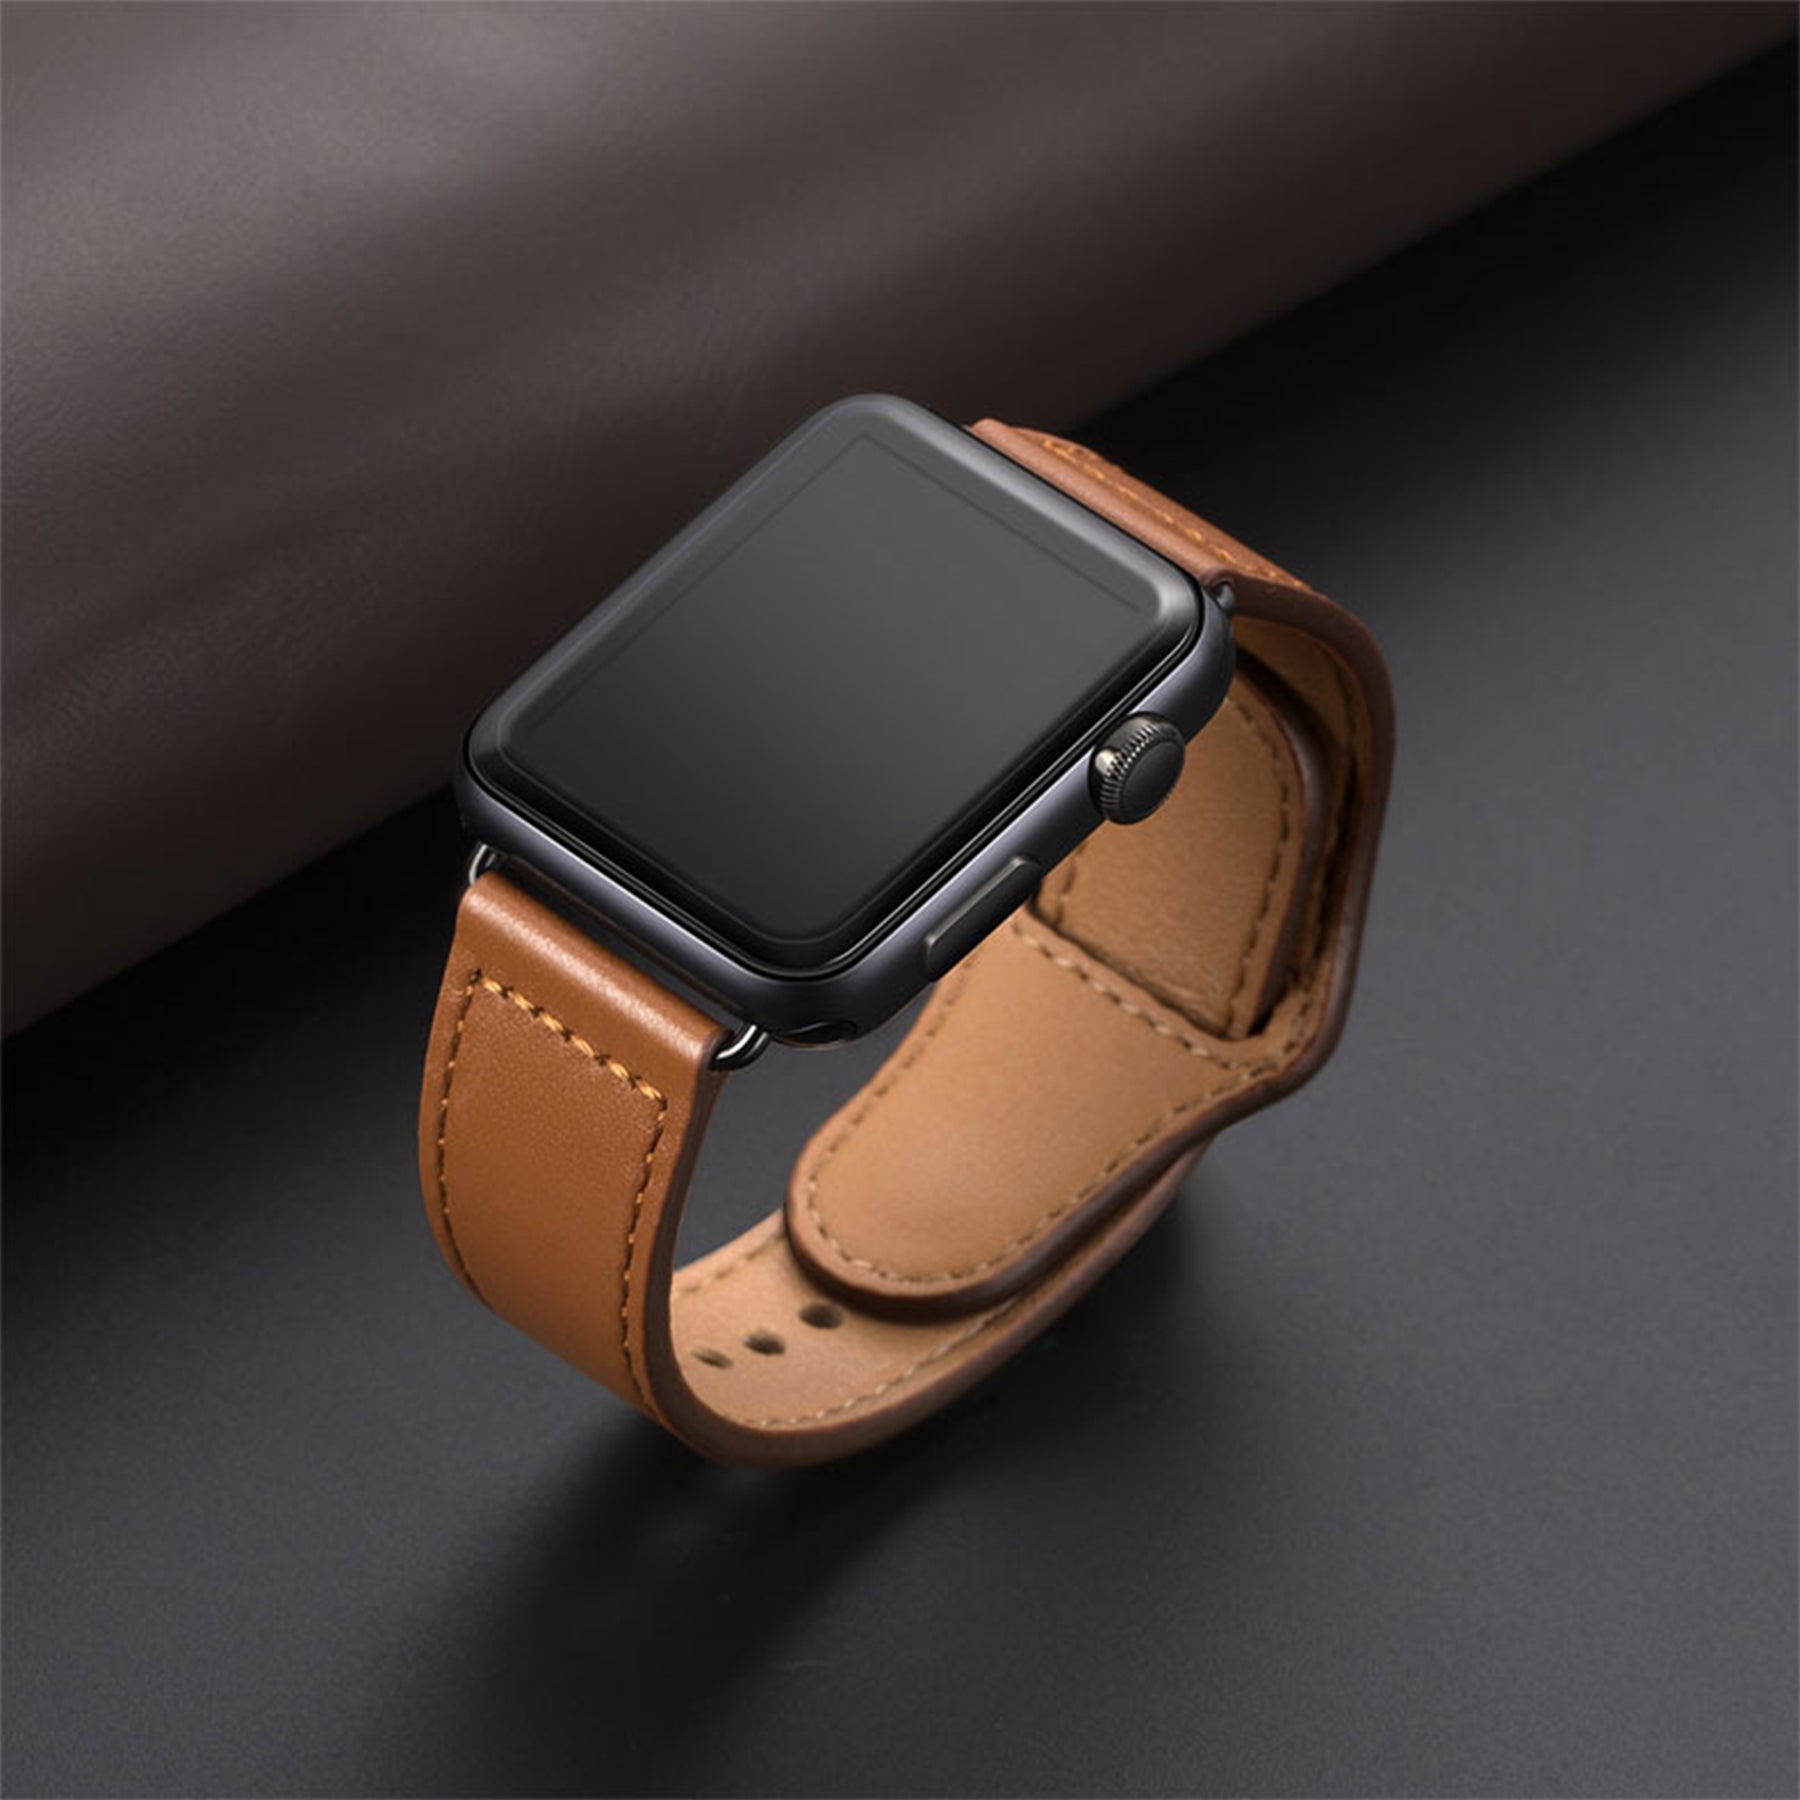 Premium Soft Apple Watch Band Brown Leather – BugBands